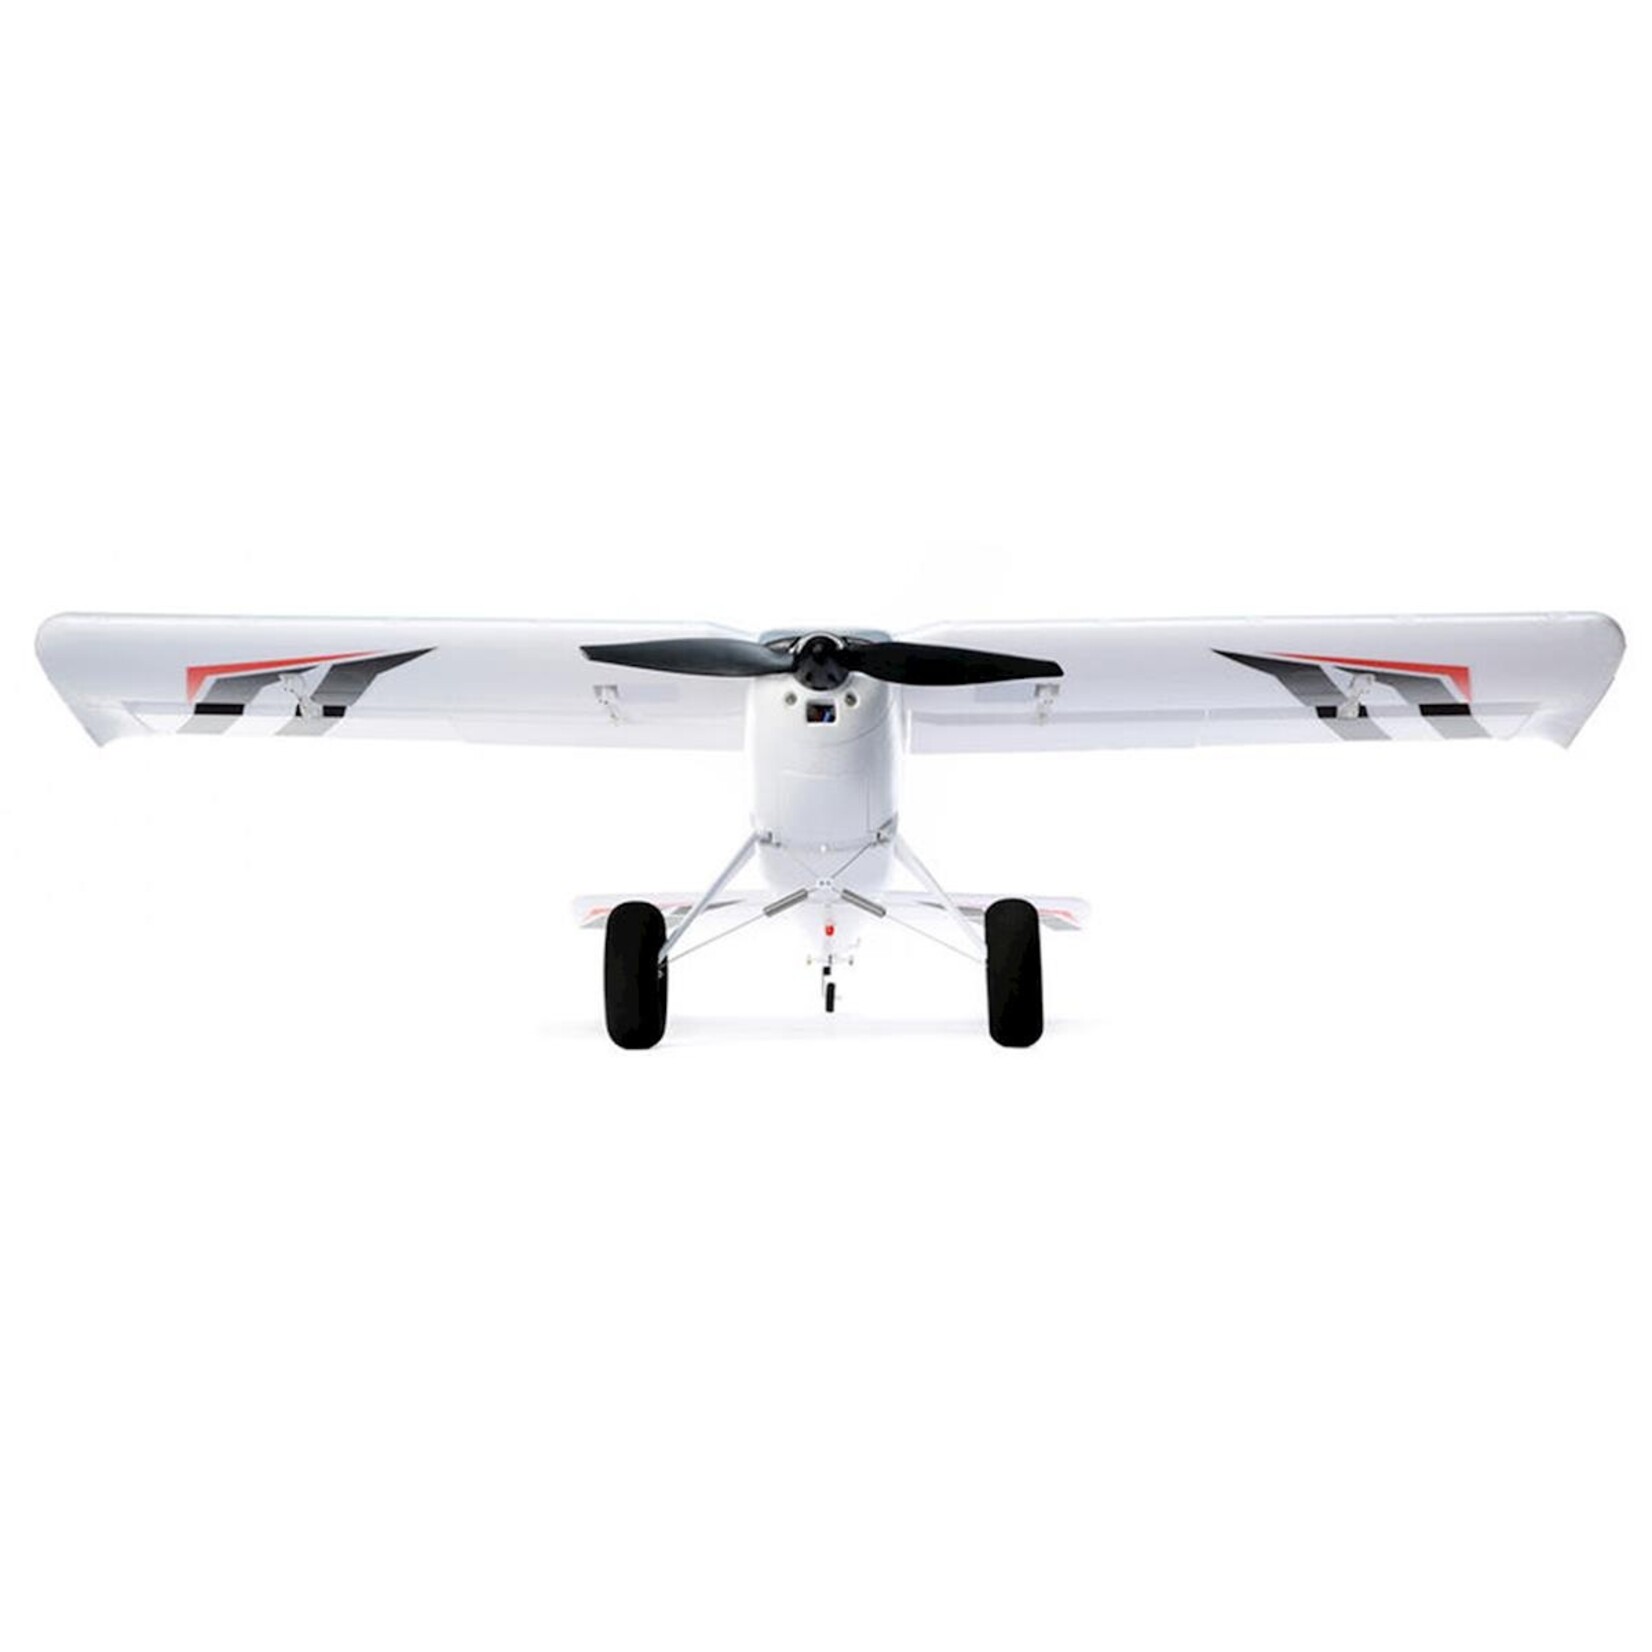 E-flite E-flite Night Timber X 1.2M BNF Basic Electric Airplane (1200mm) w/AS3X & Safe Select #EFL13850